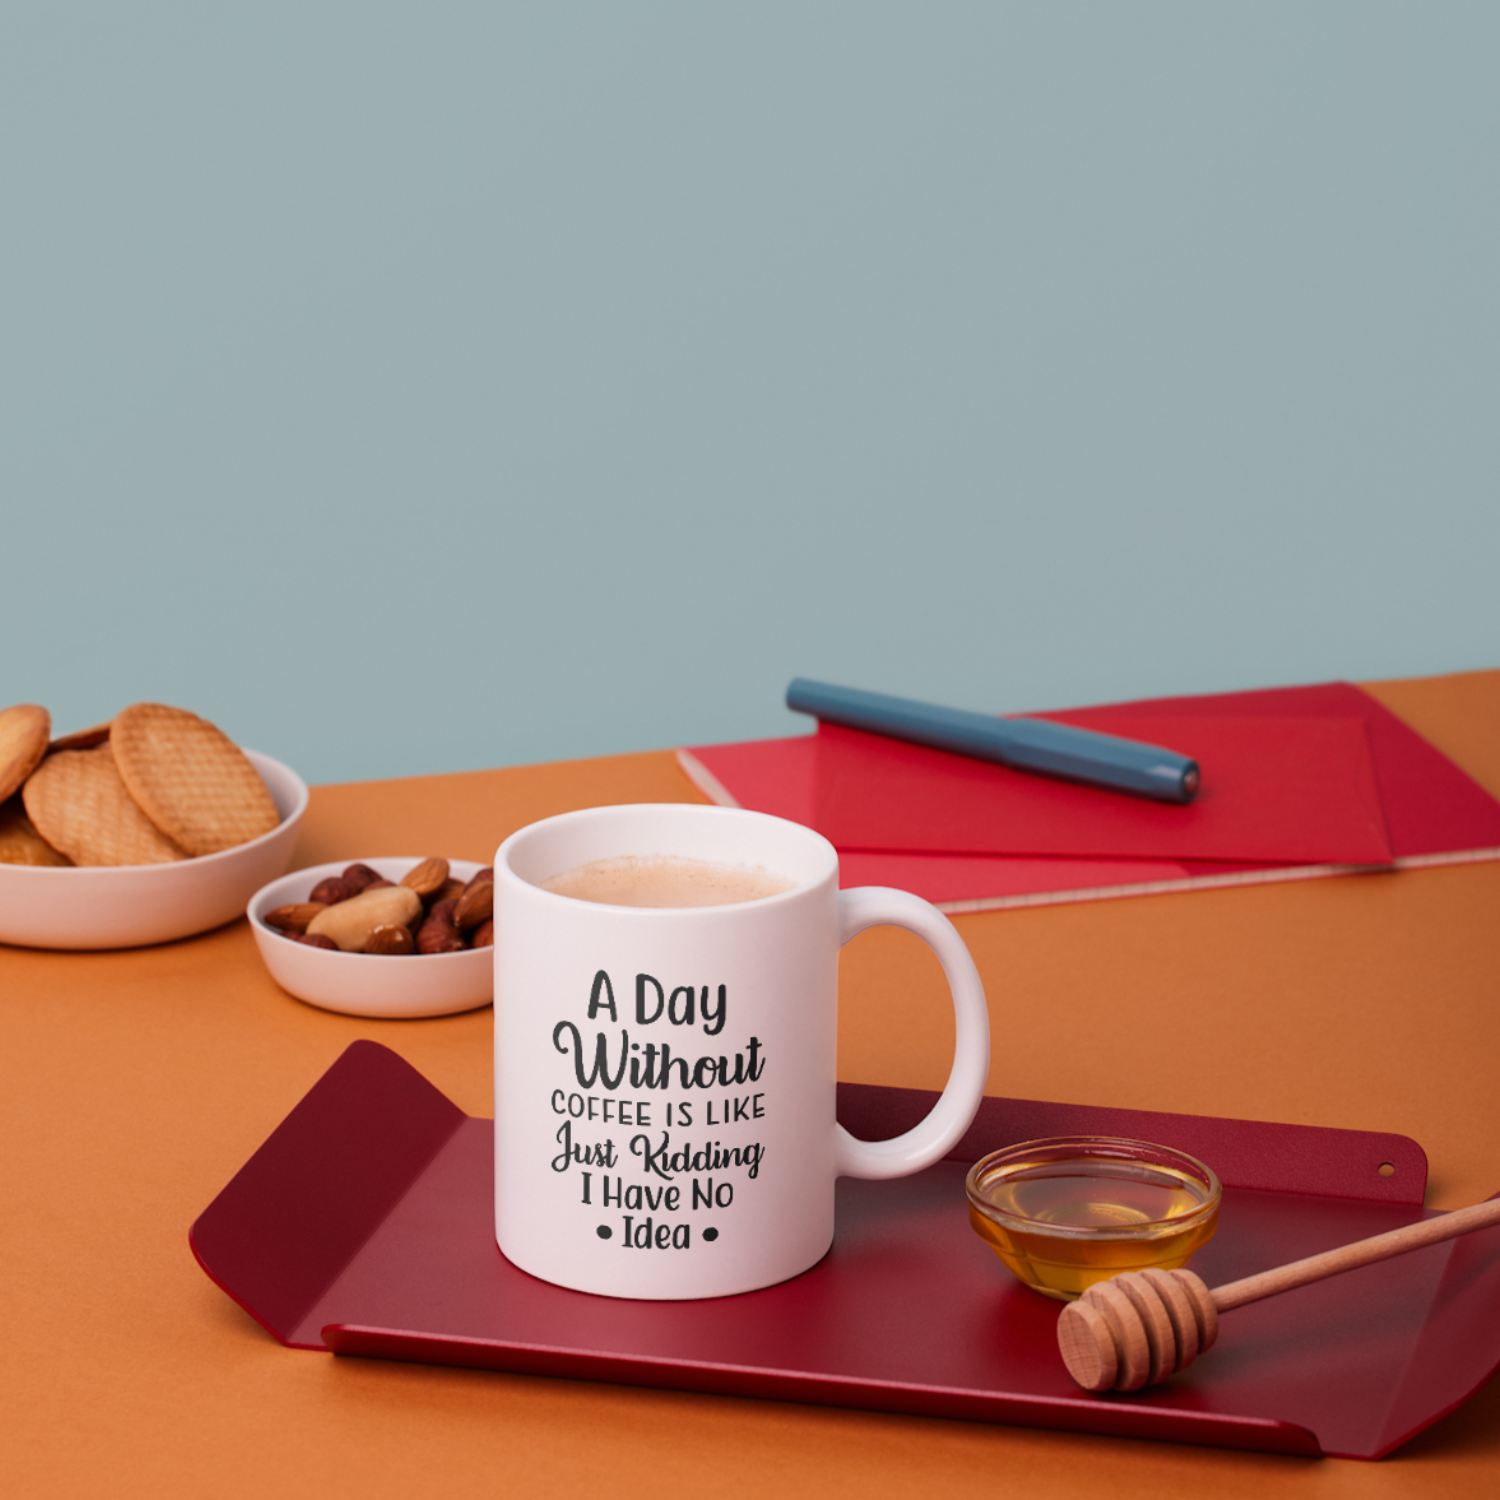 A Day Without Coffee Is Like_. Just Kidding I Have No Idea SVG | Digital Download | Cut File | SVG